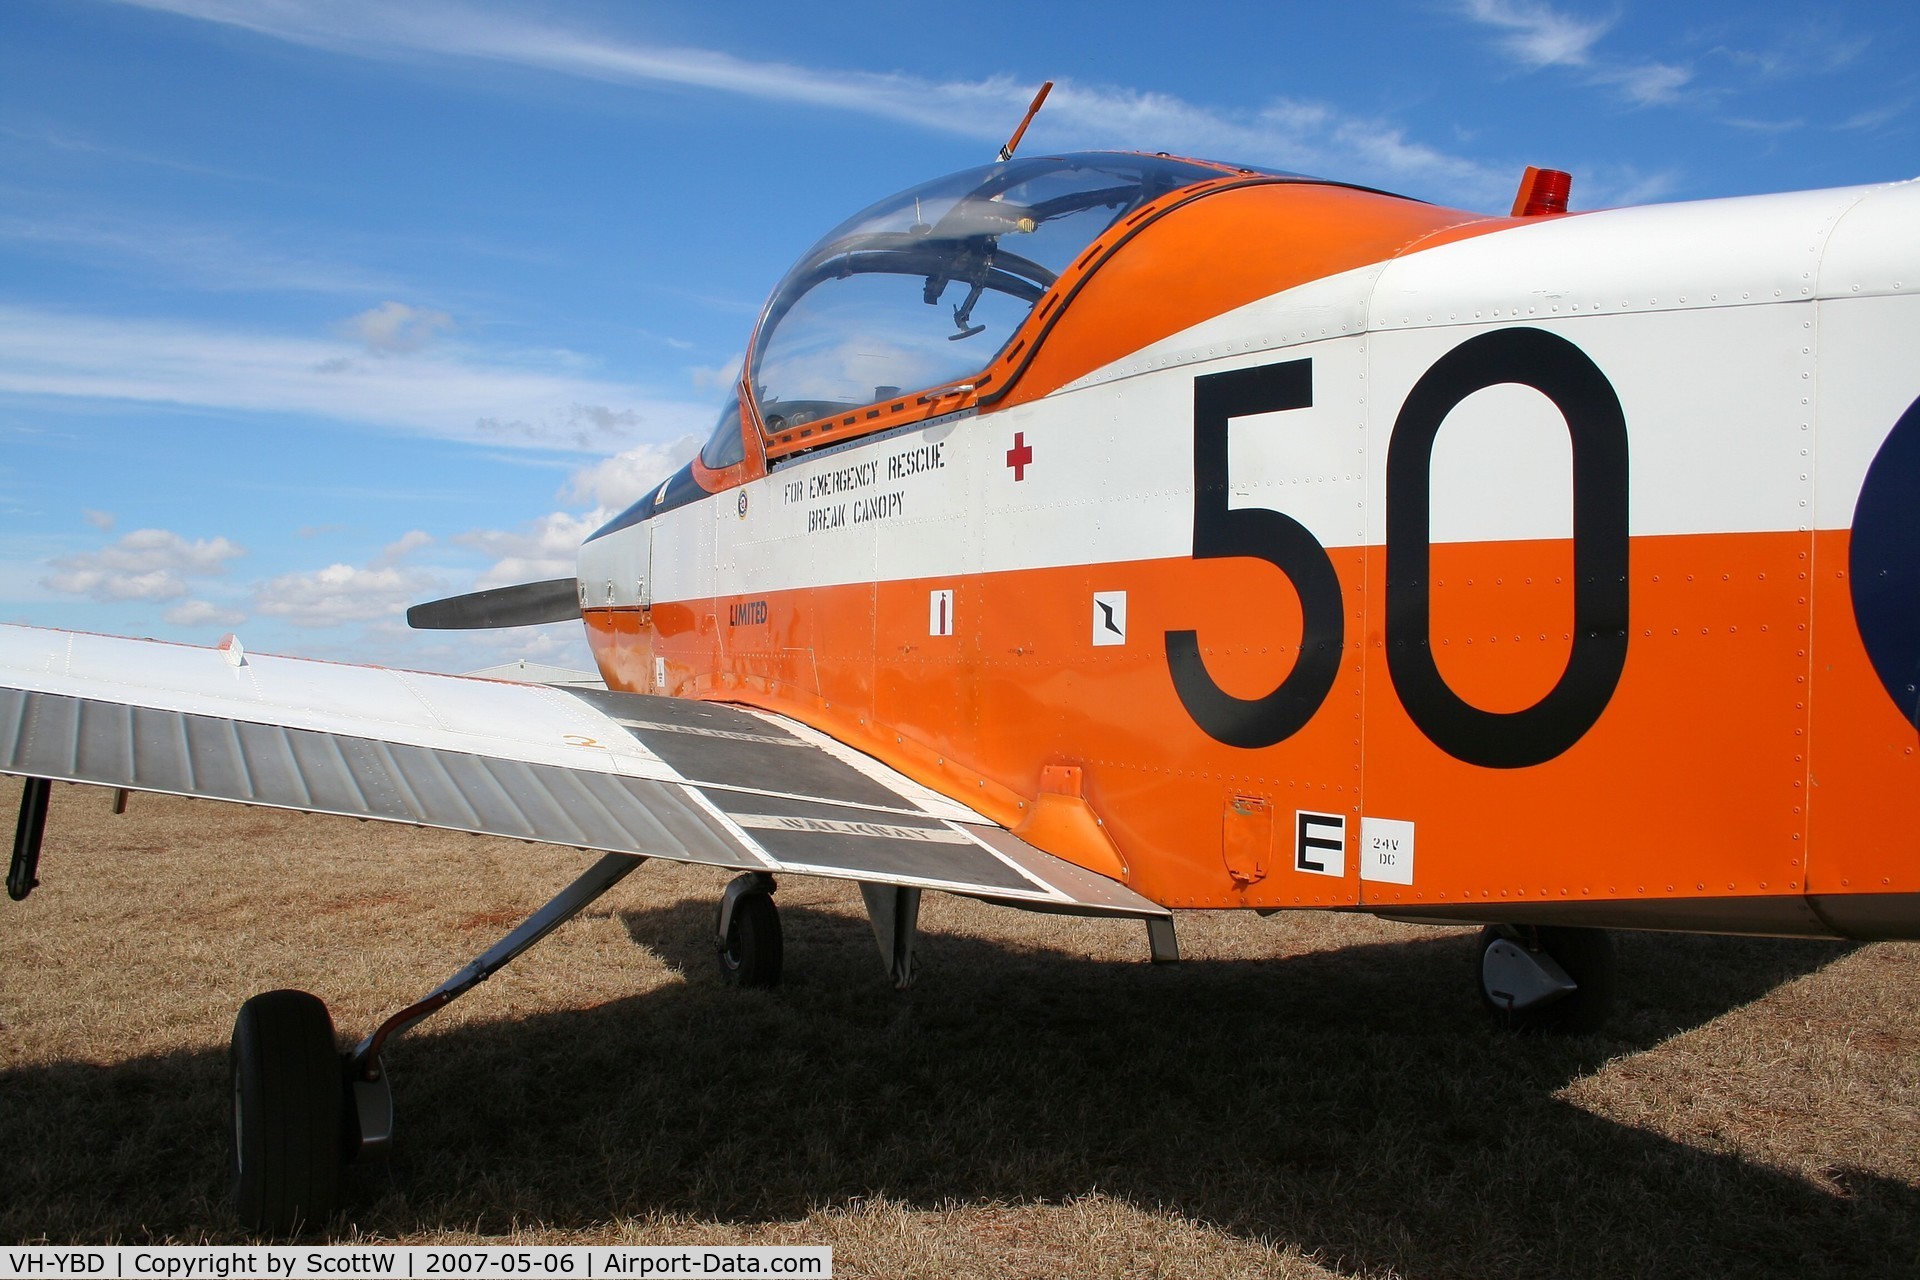 VH-YBD, 1975 New Zealand CT-4A Airtrainer C/N 050, image taken at Toowoomba. Guido Zuccoli Memorial Fly-in